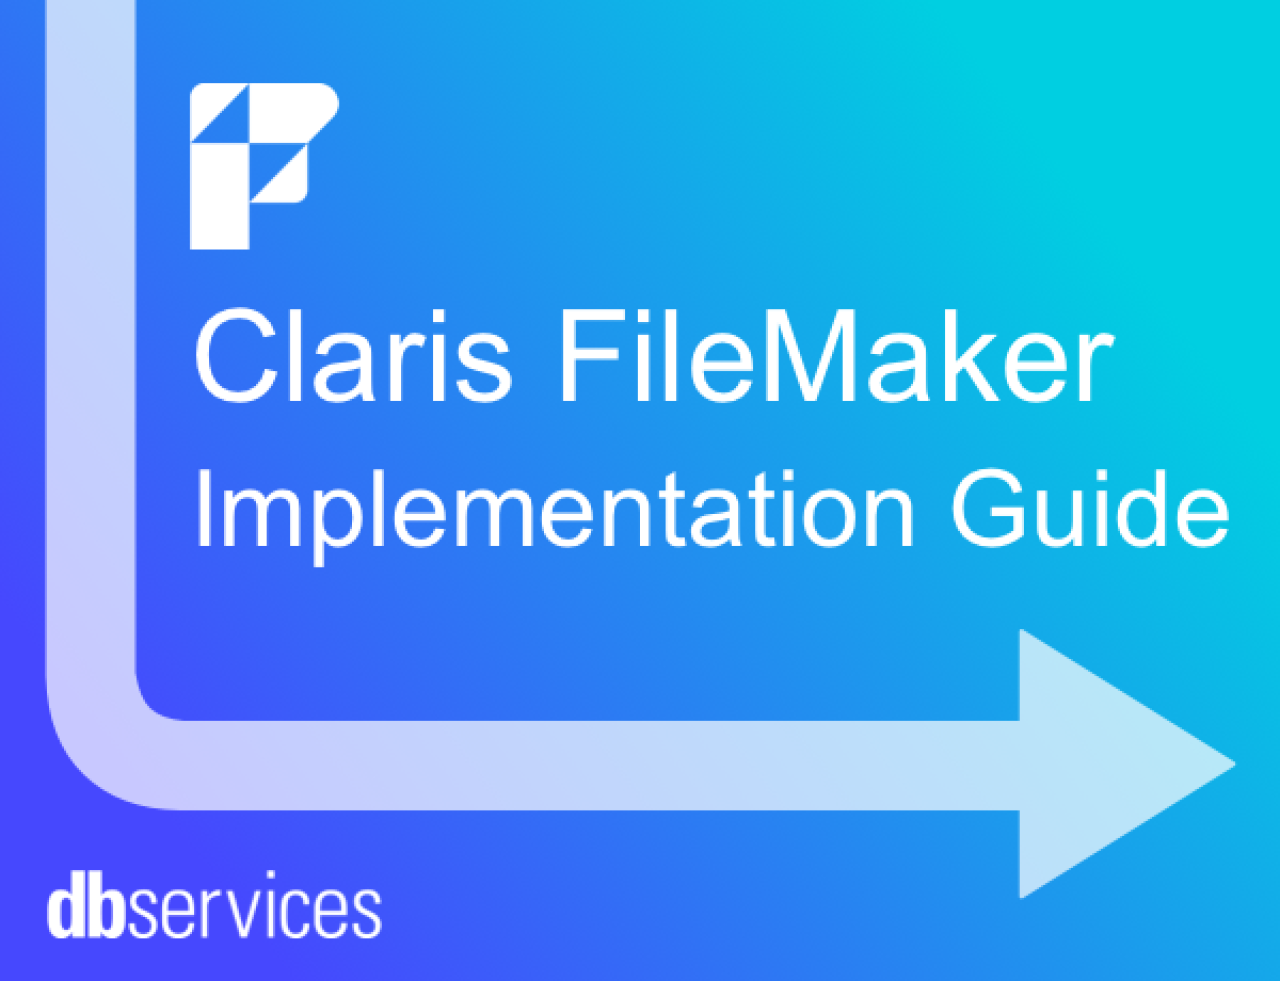 claris filemaker implementation guide db services.